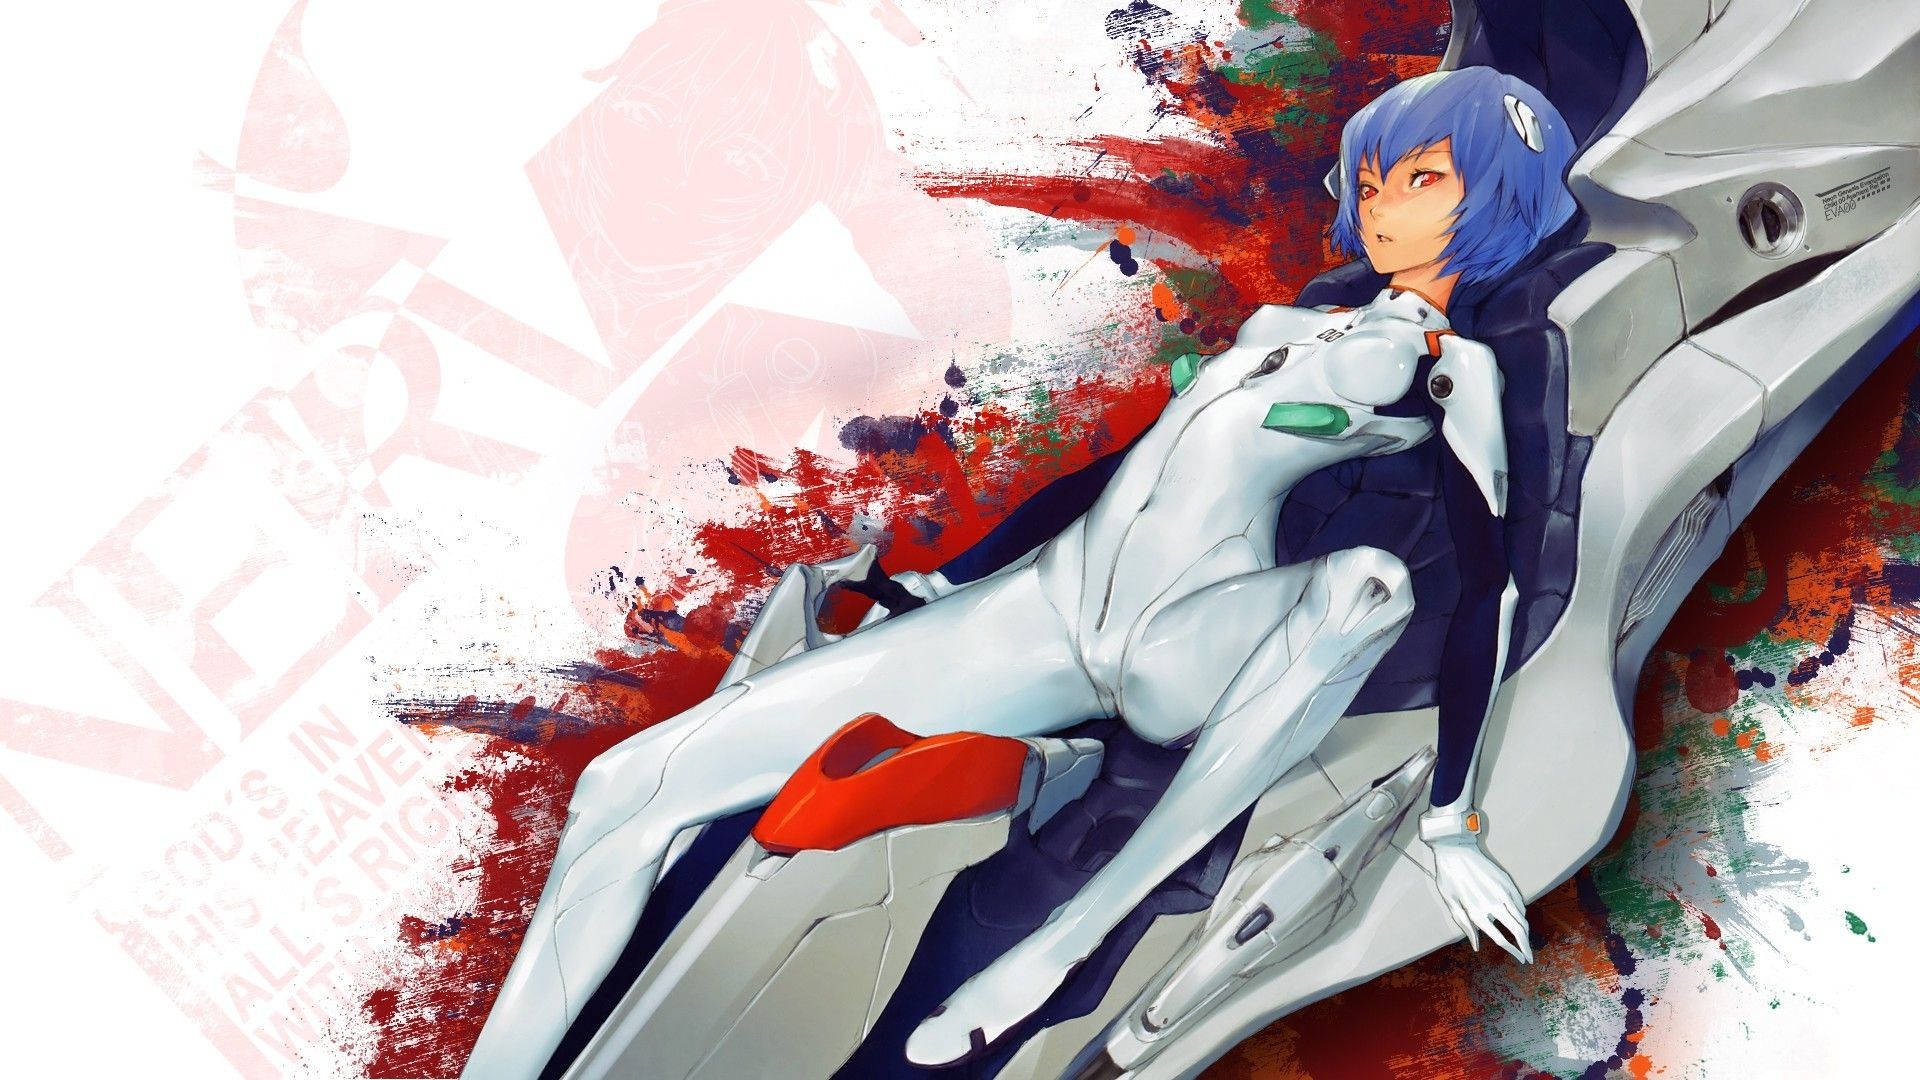 Evangelion 1920X1080 Wallpaper and Background Image